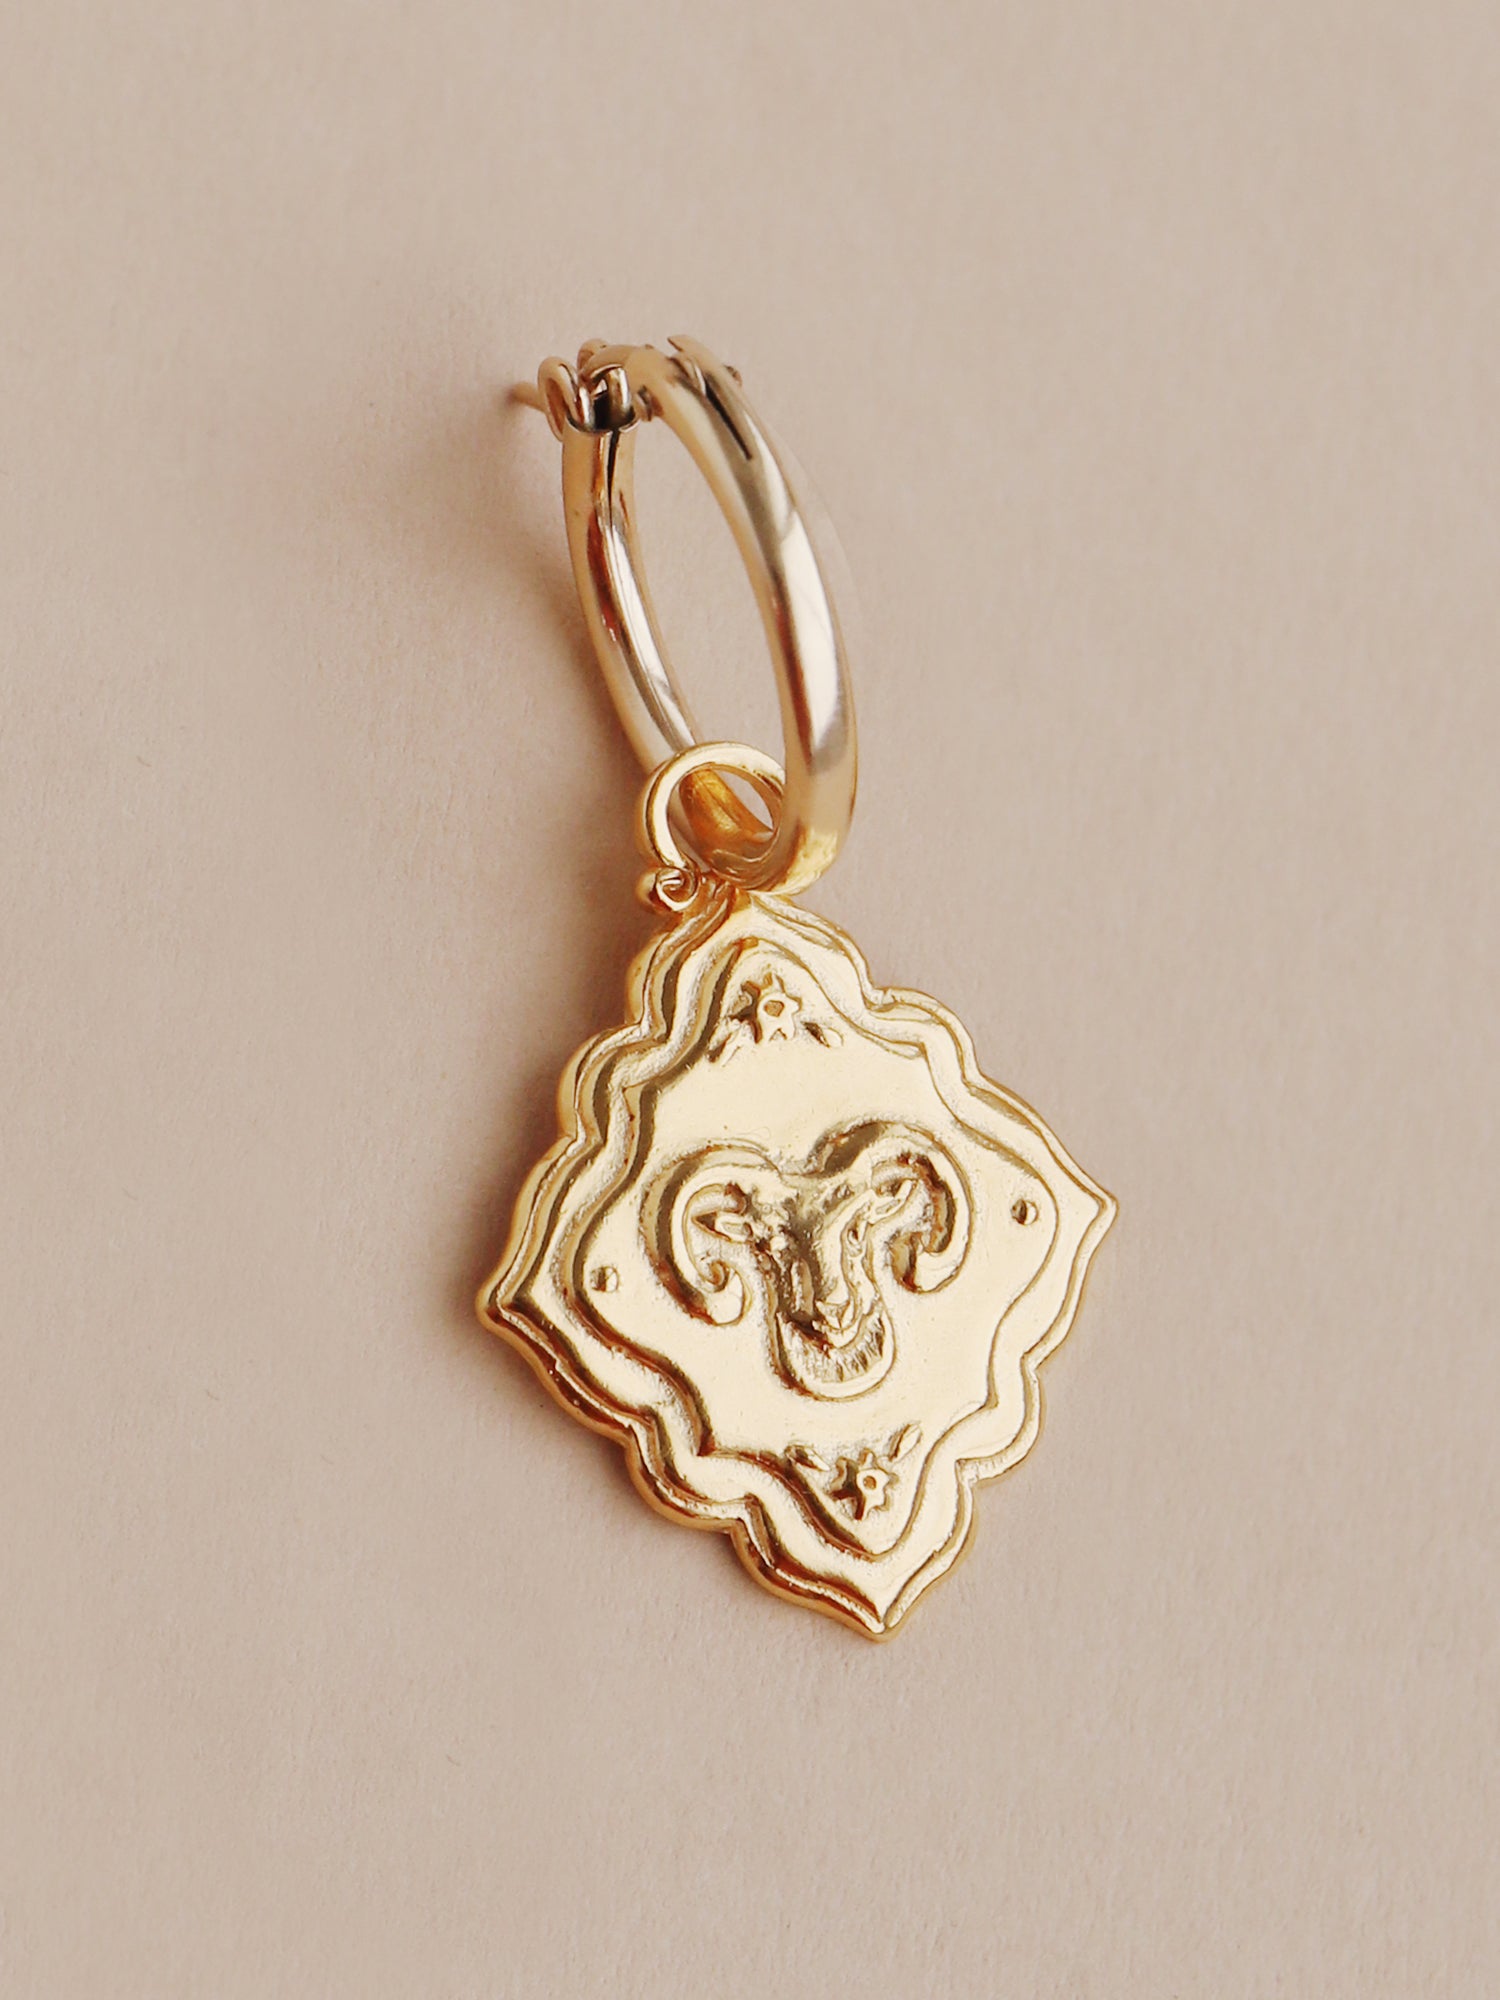 Aries - Individual Charm in Gold